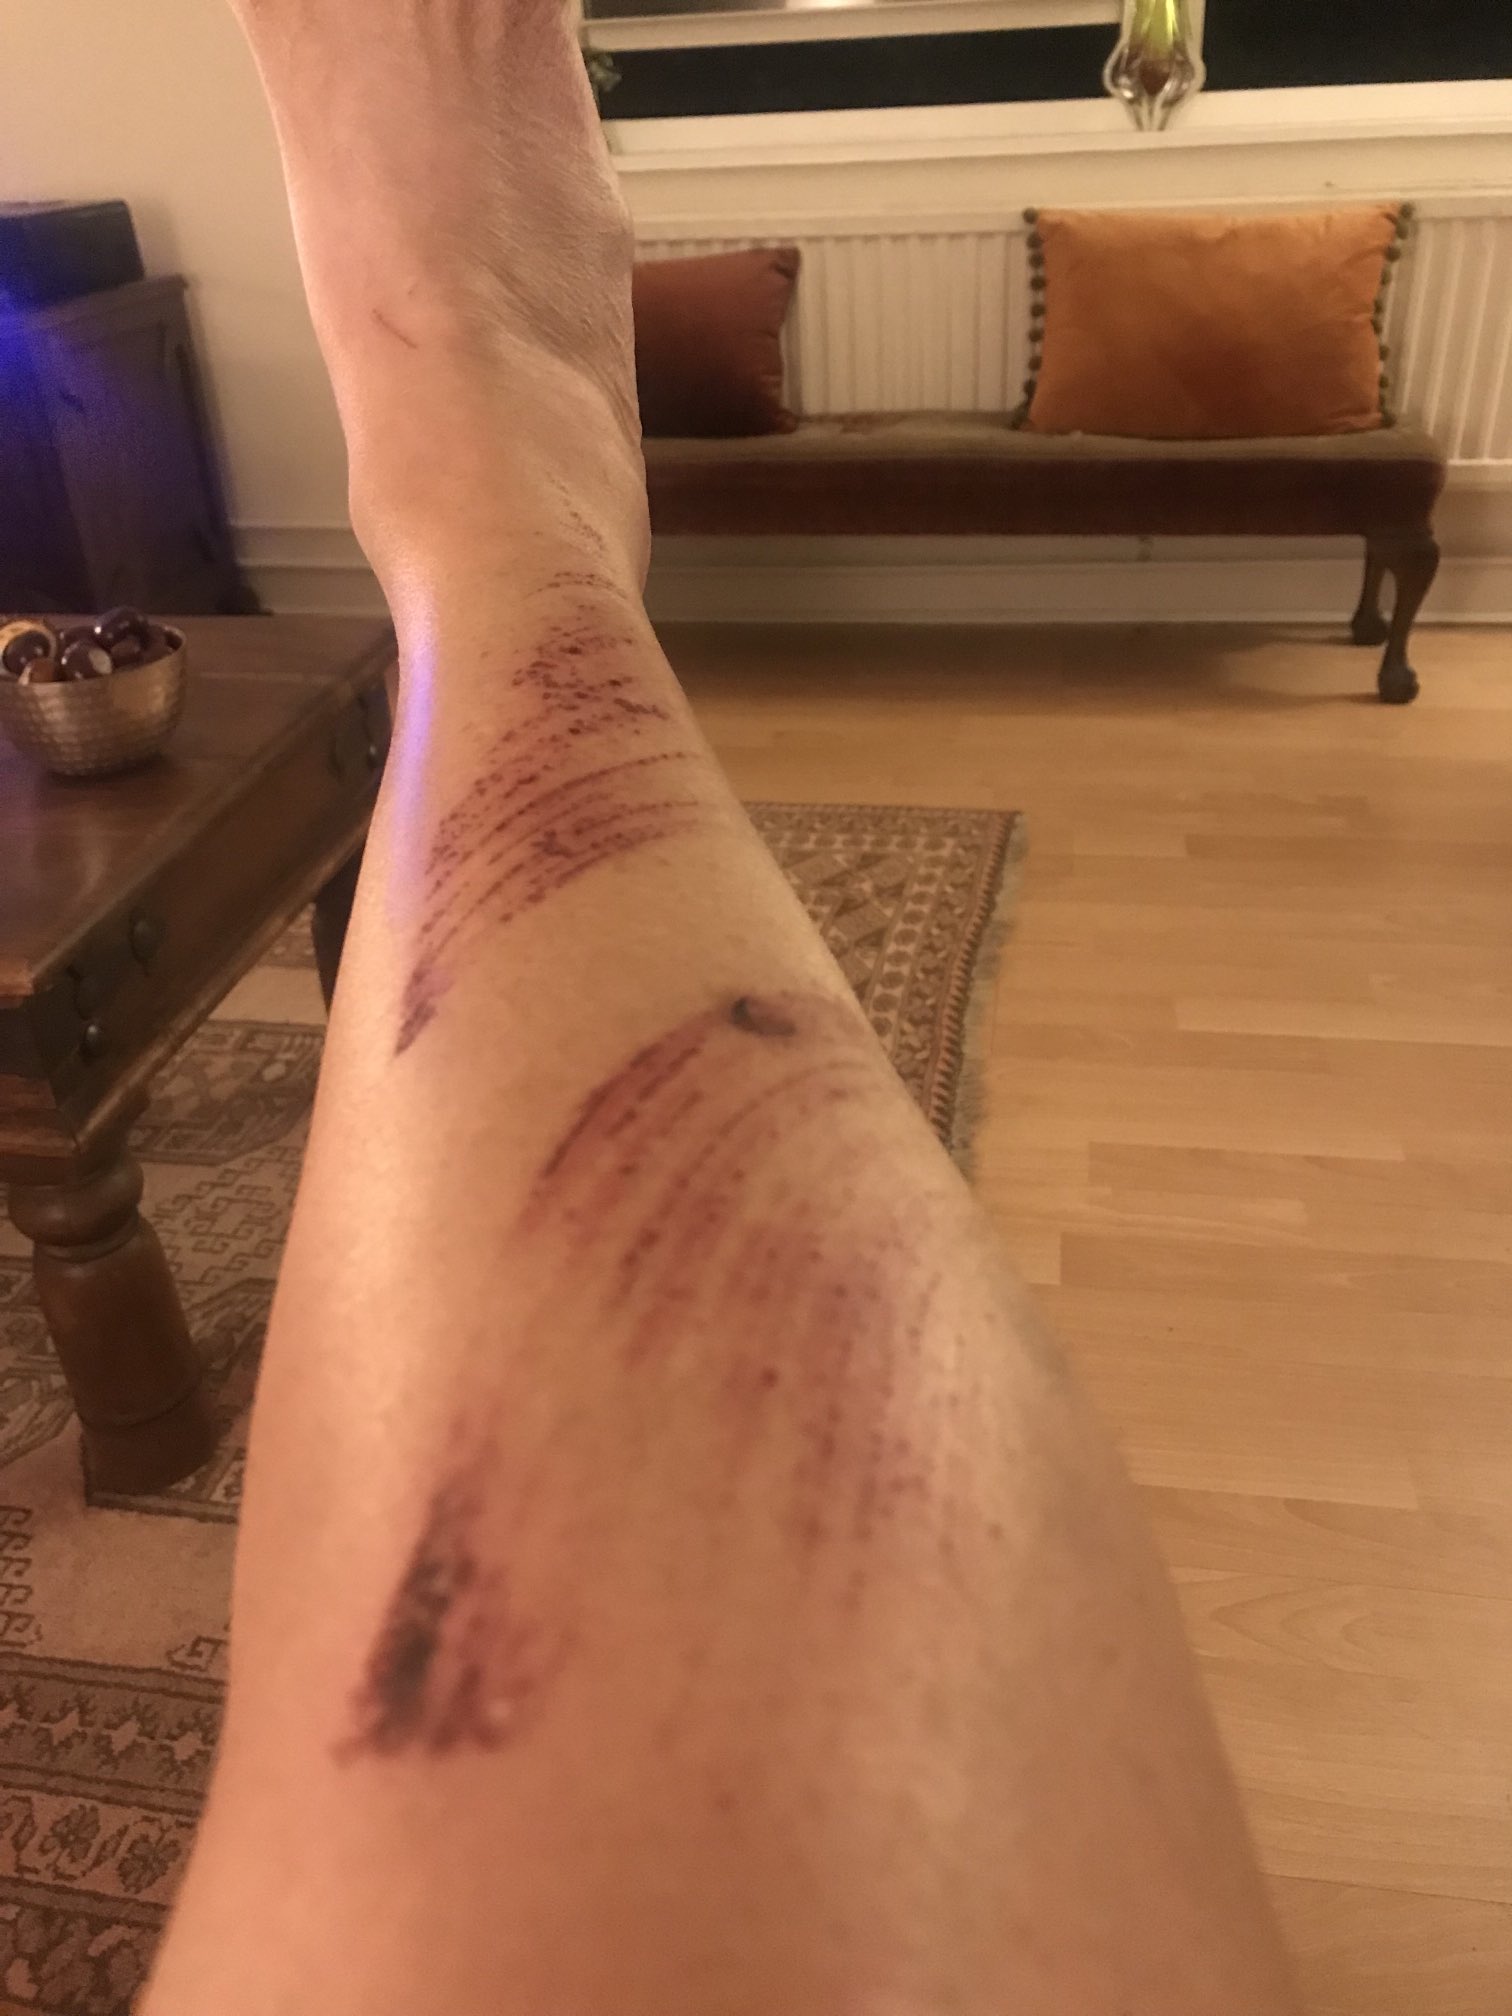 Louise Painedavey on X: Leg update. So sore. Bruise on back is massive.  Would show you all but involves bra strap so may be taken down by Twitter  lol. Suffice to say